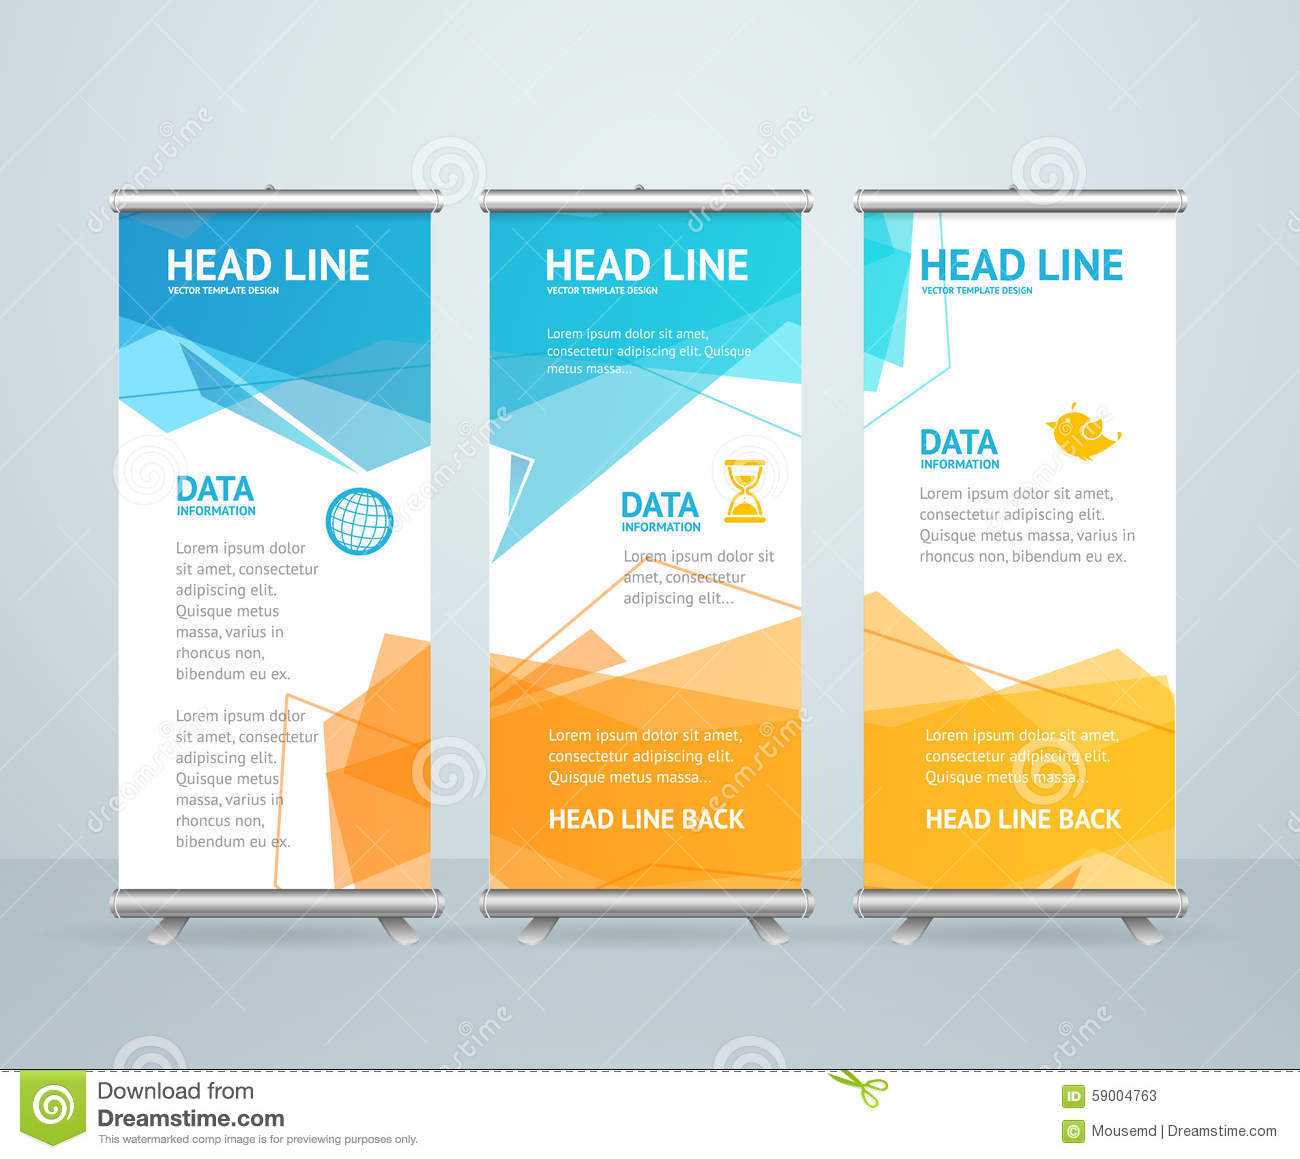 How To Design A Pop Up Banner – Yeppe Pertaining To Pop Up Banner Design Template